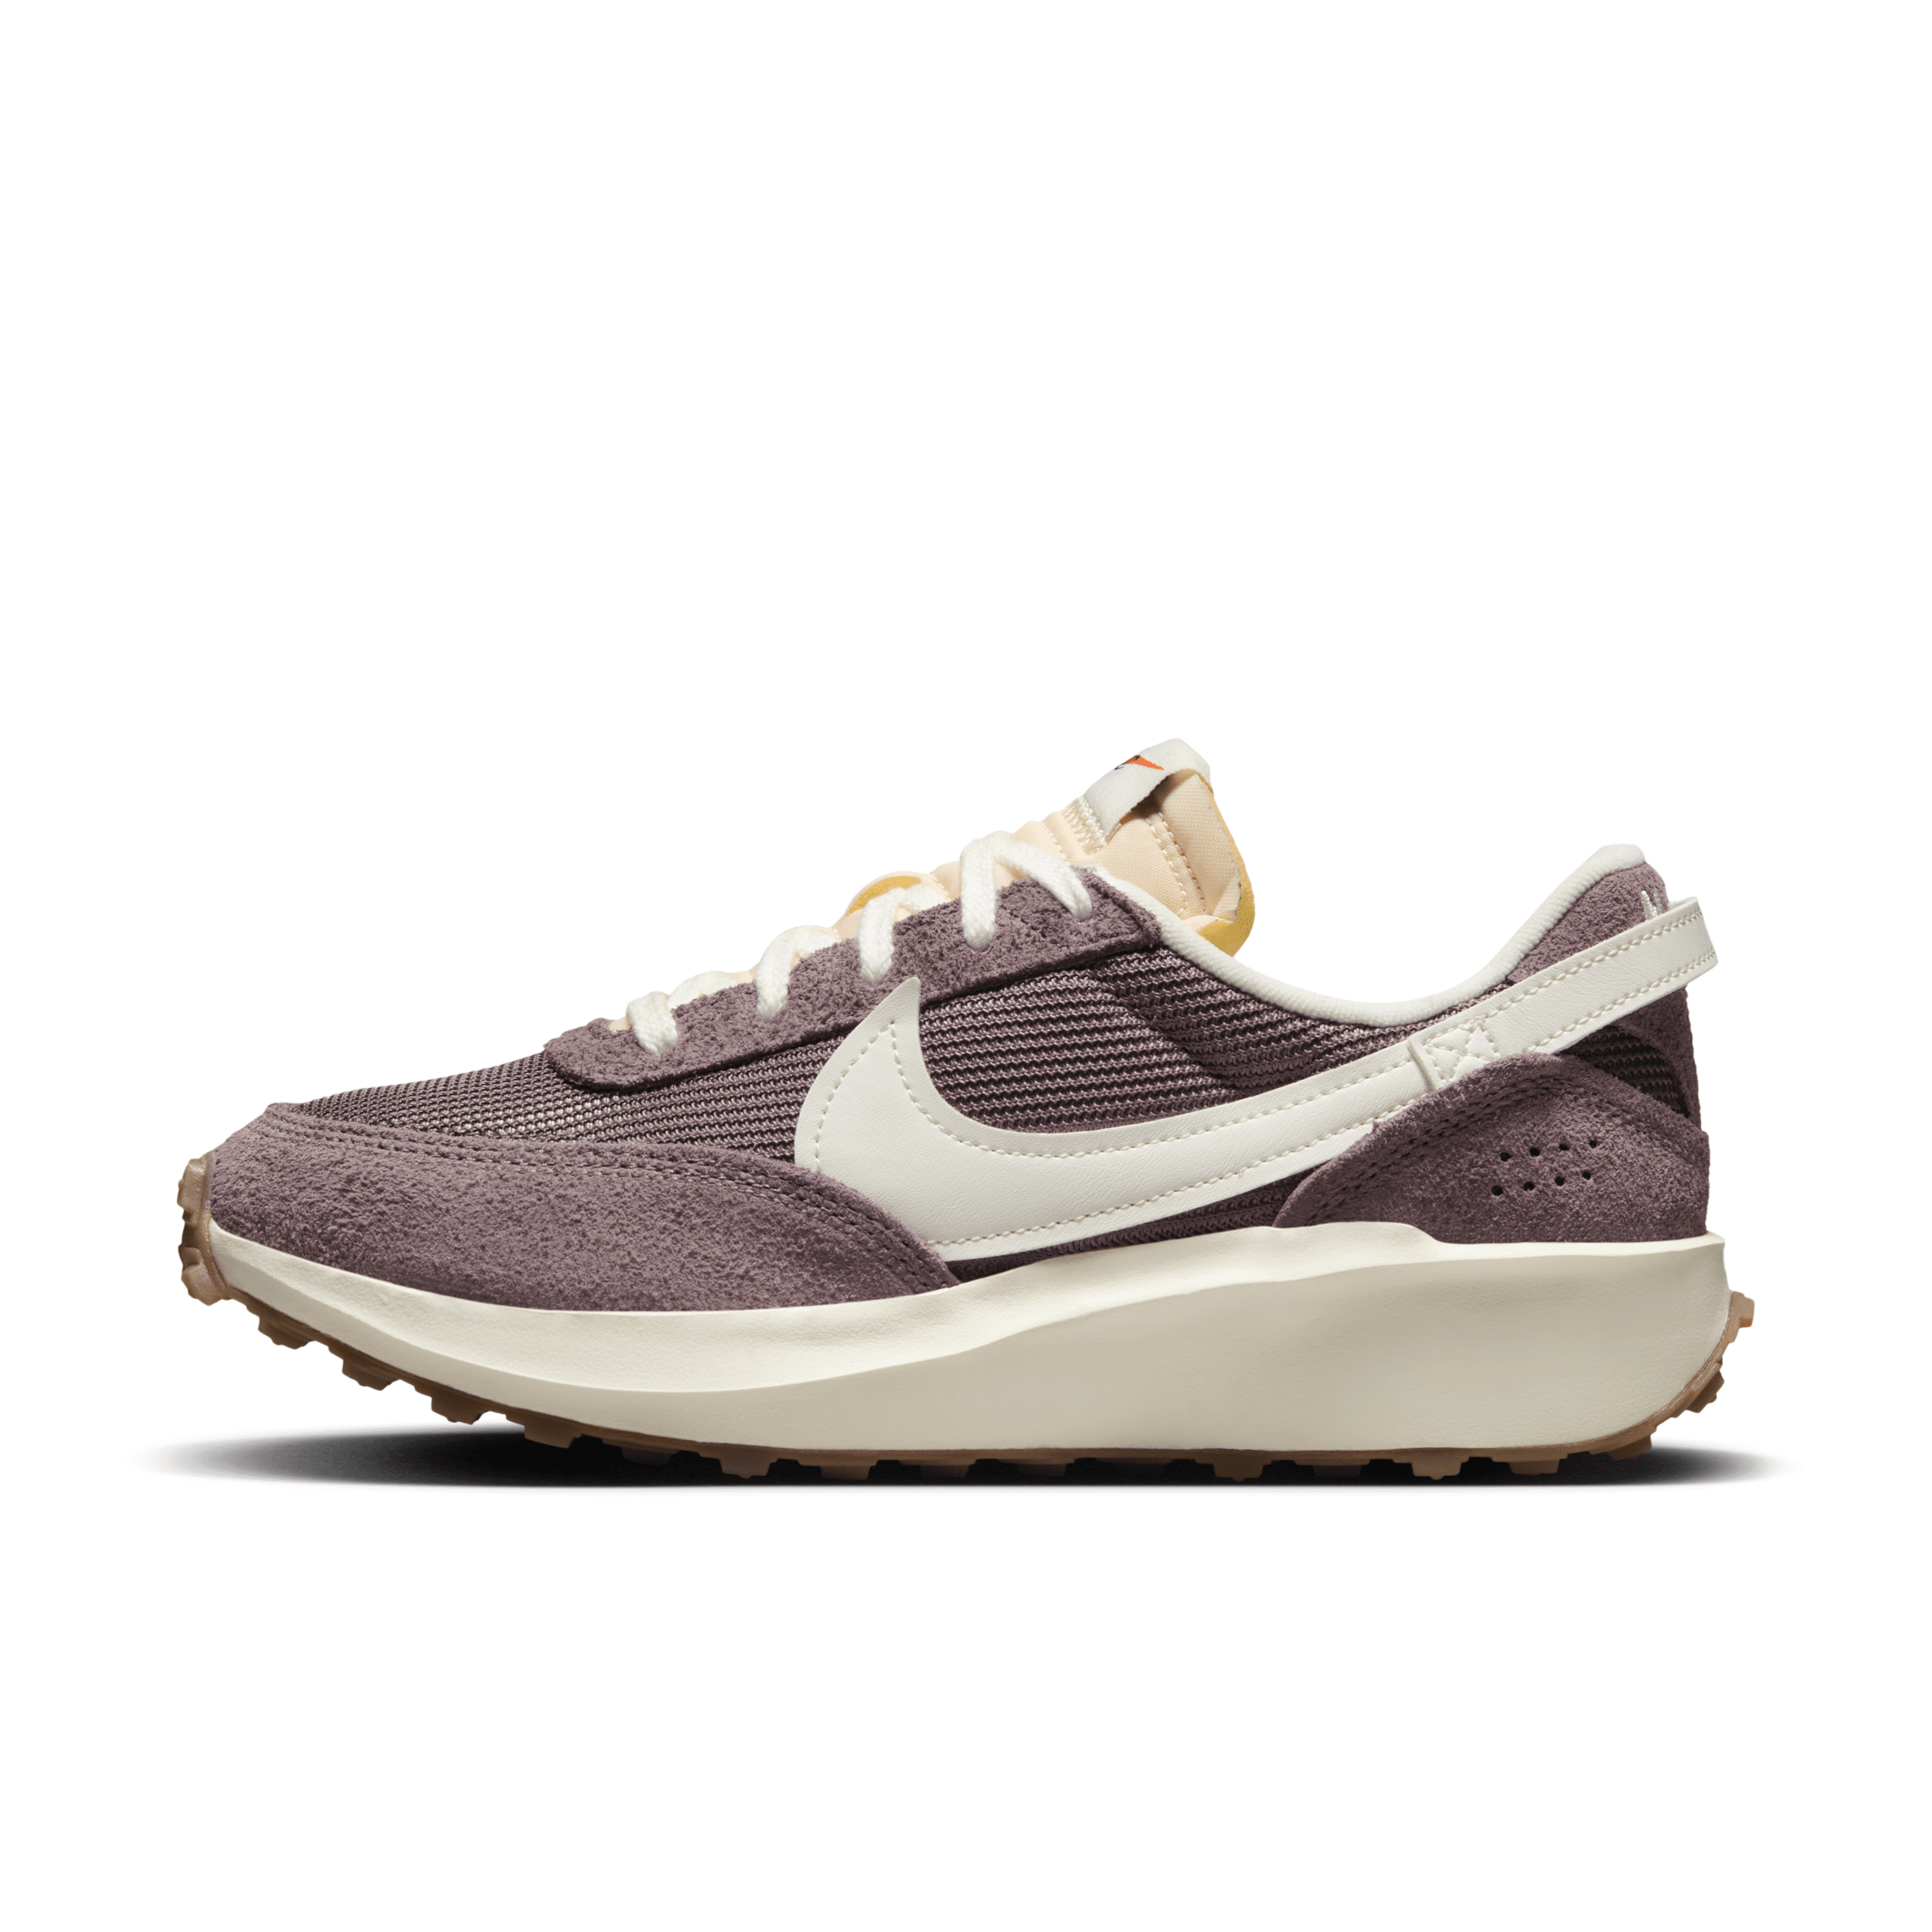 Nike Women's Waffle Debut Vintage Shoes in Brown, Size: 5.5 | DX2931-200